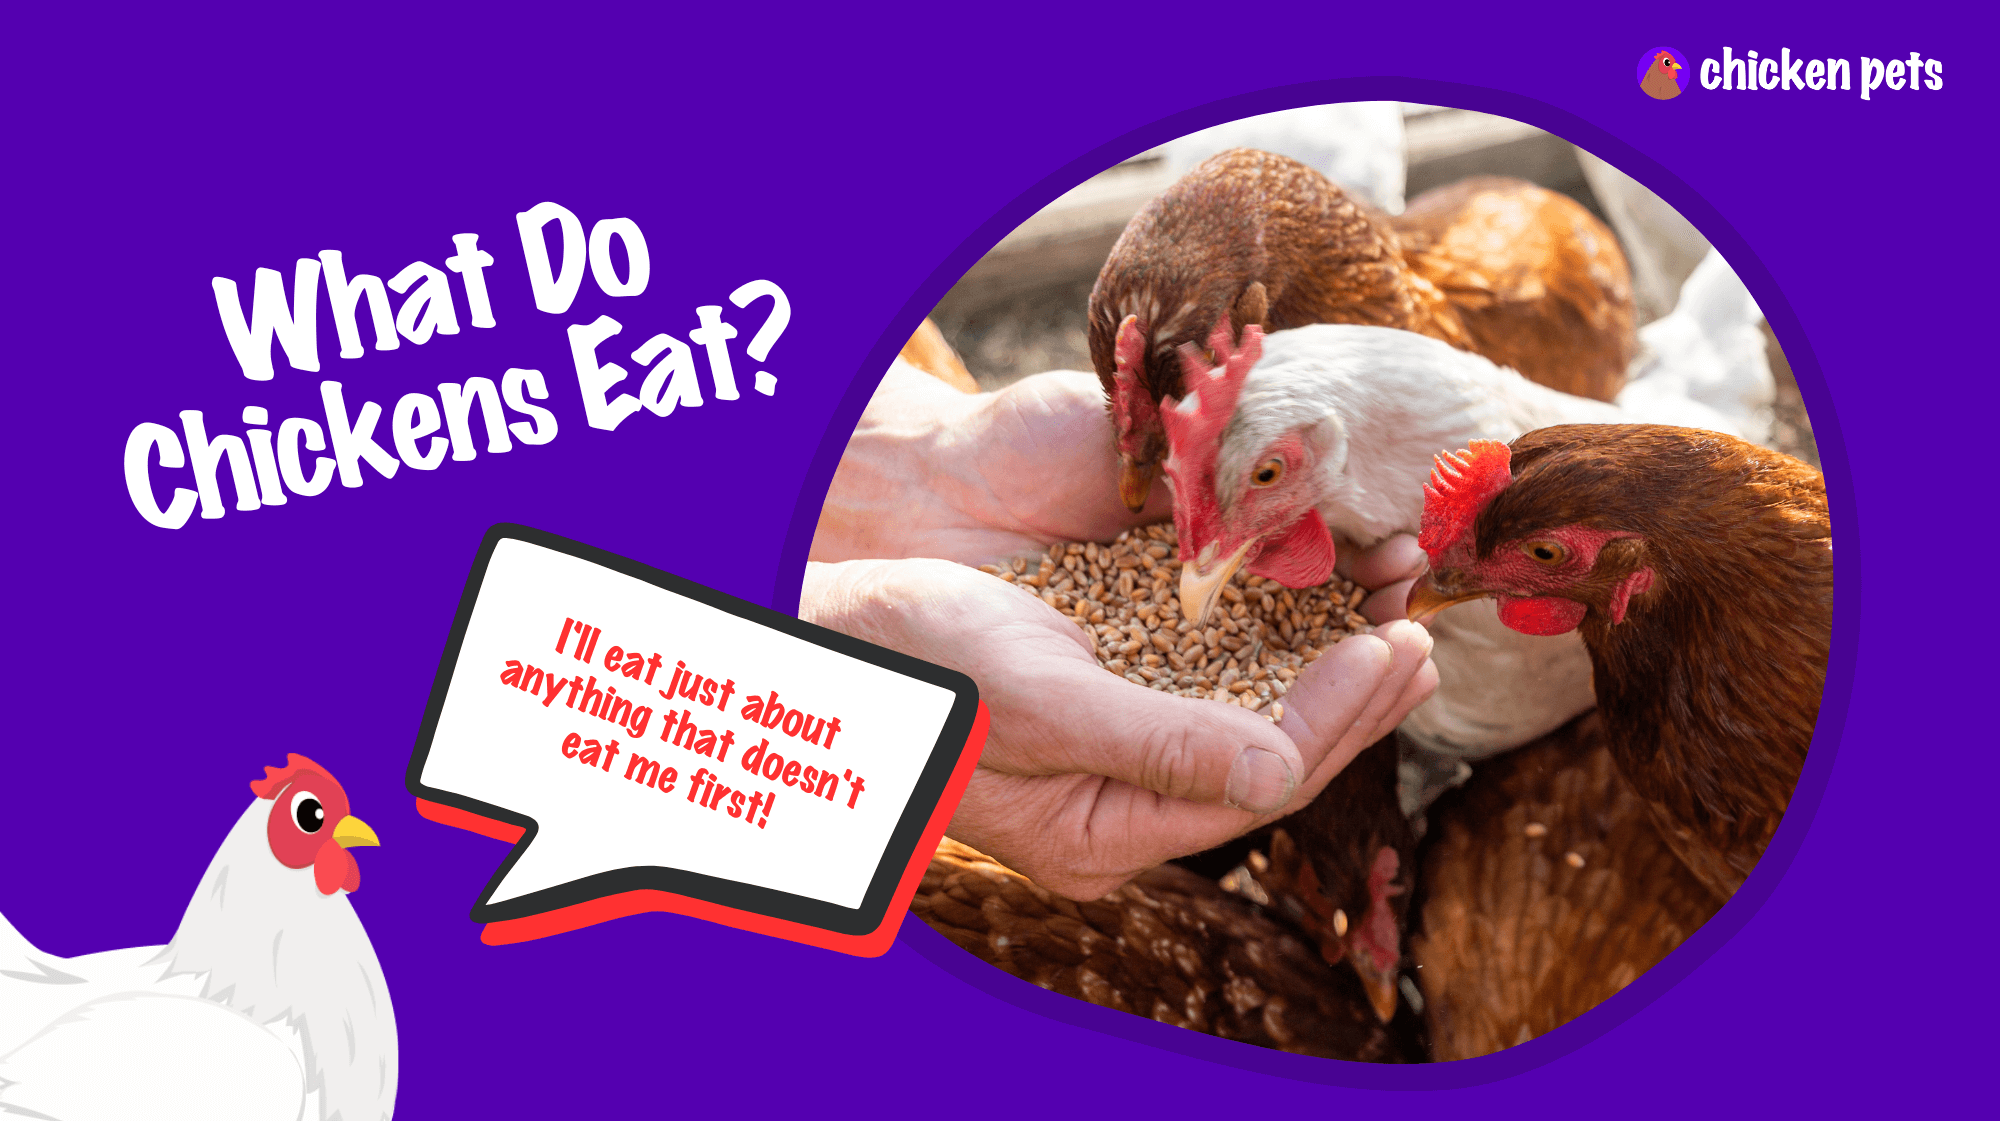 what do chickens eat